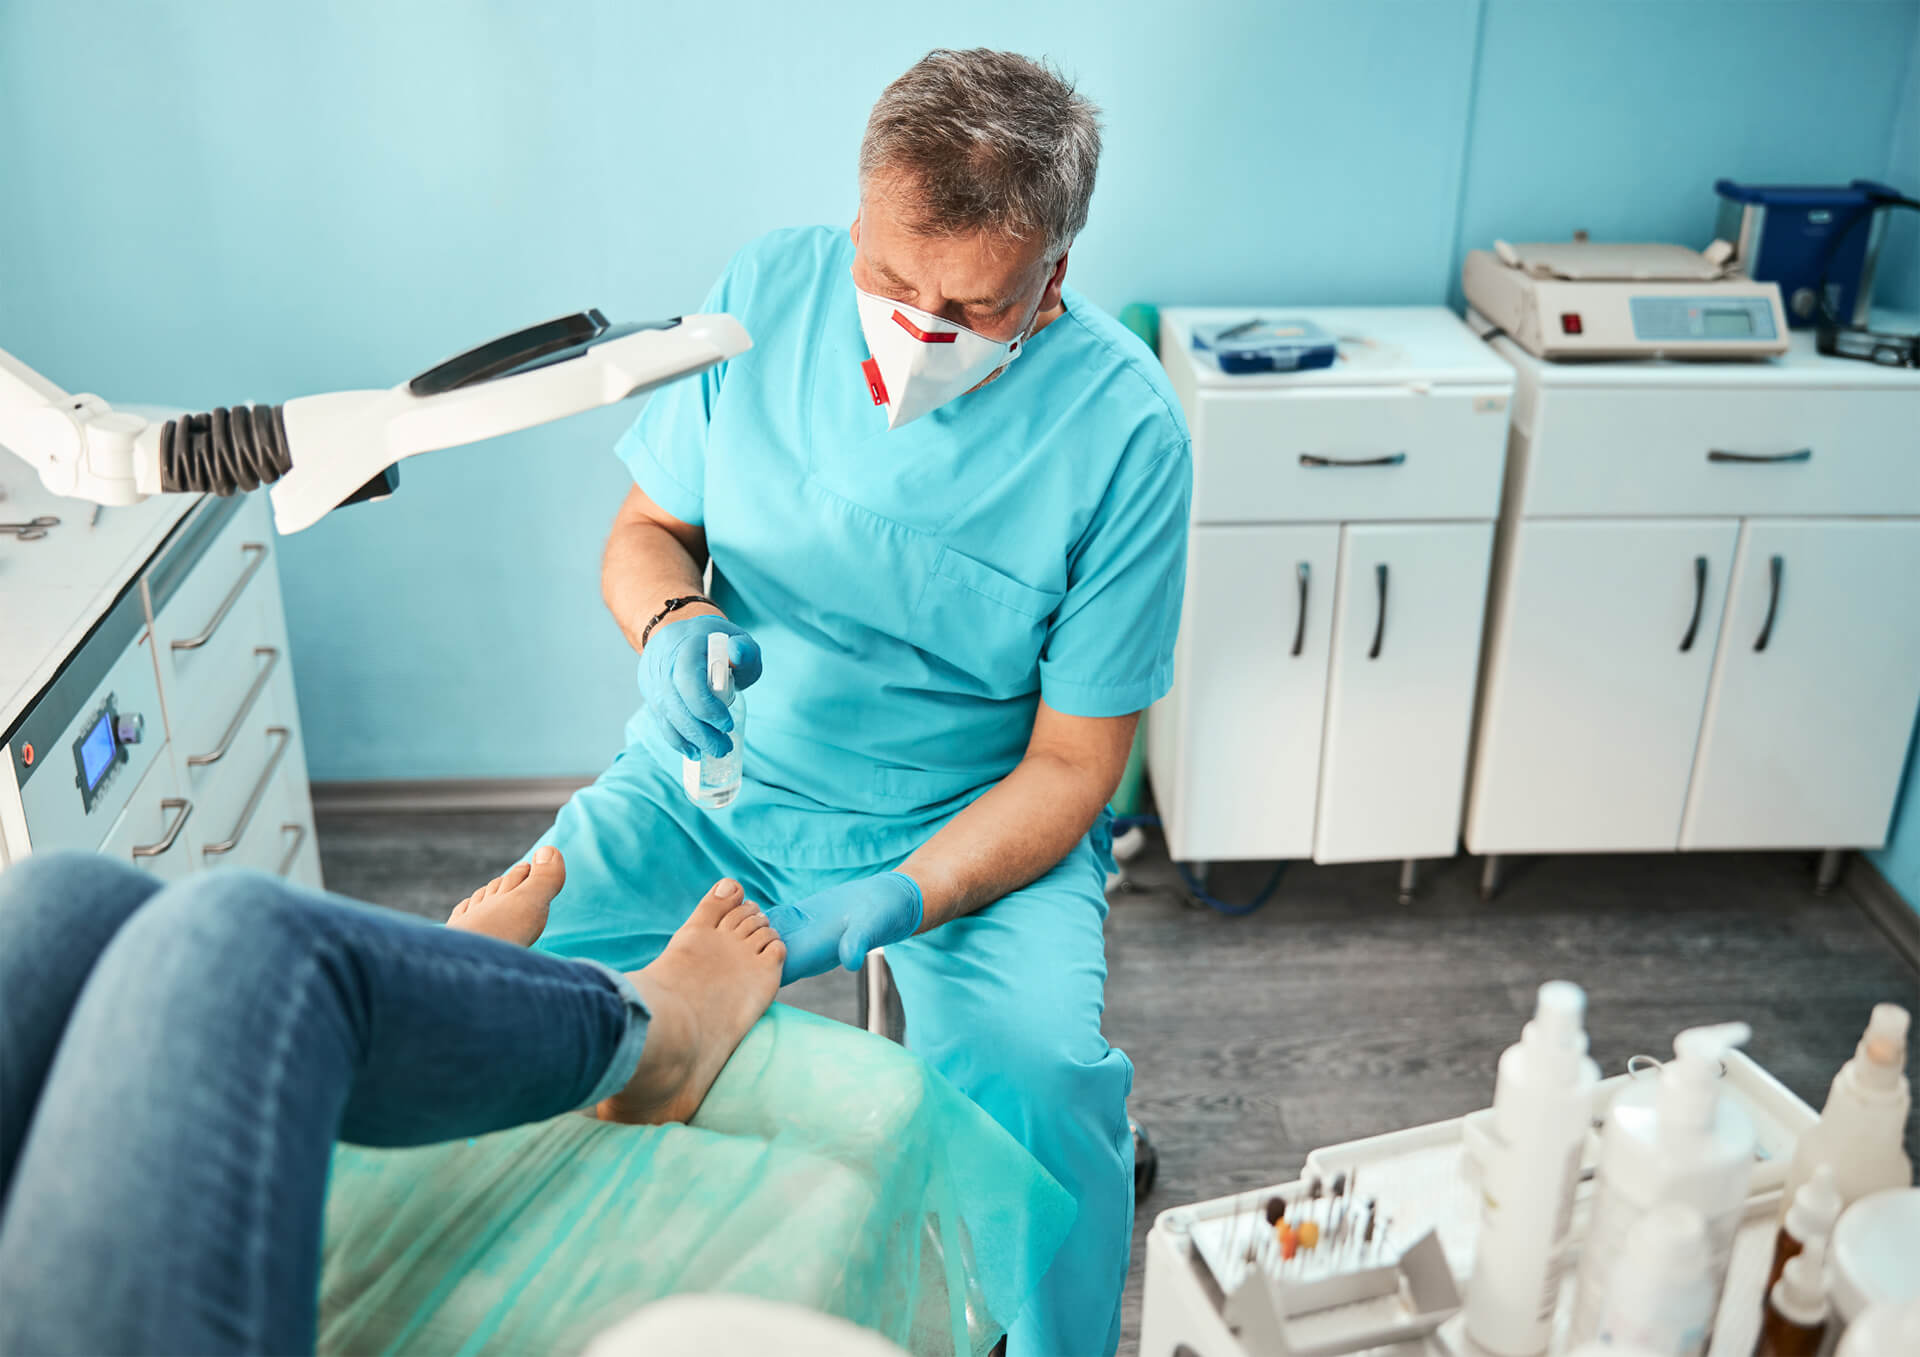 A white male Podiatrist sits treating the feet of a person.